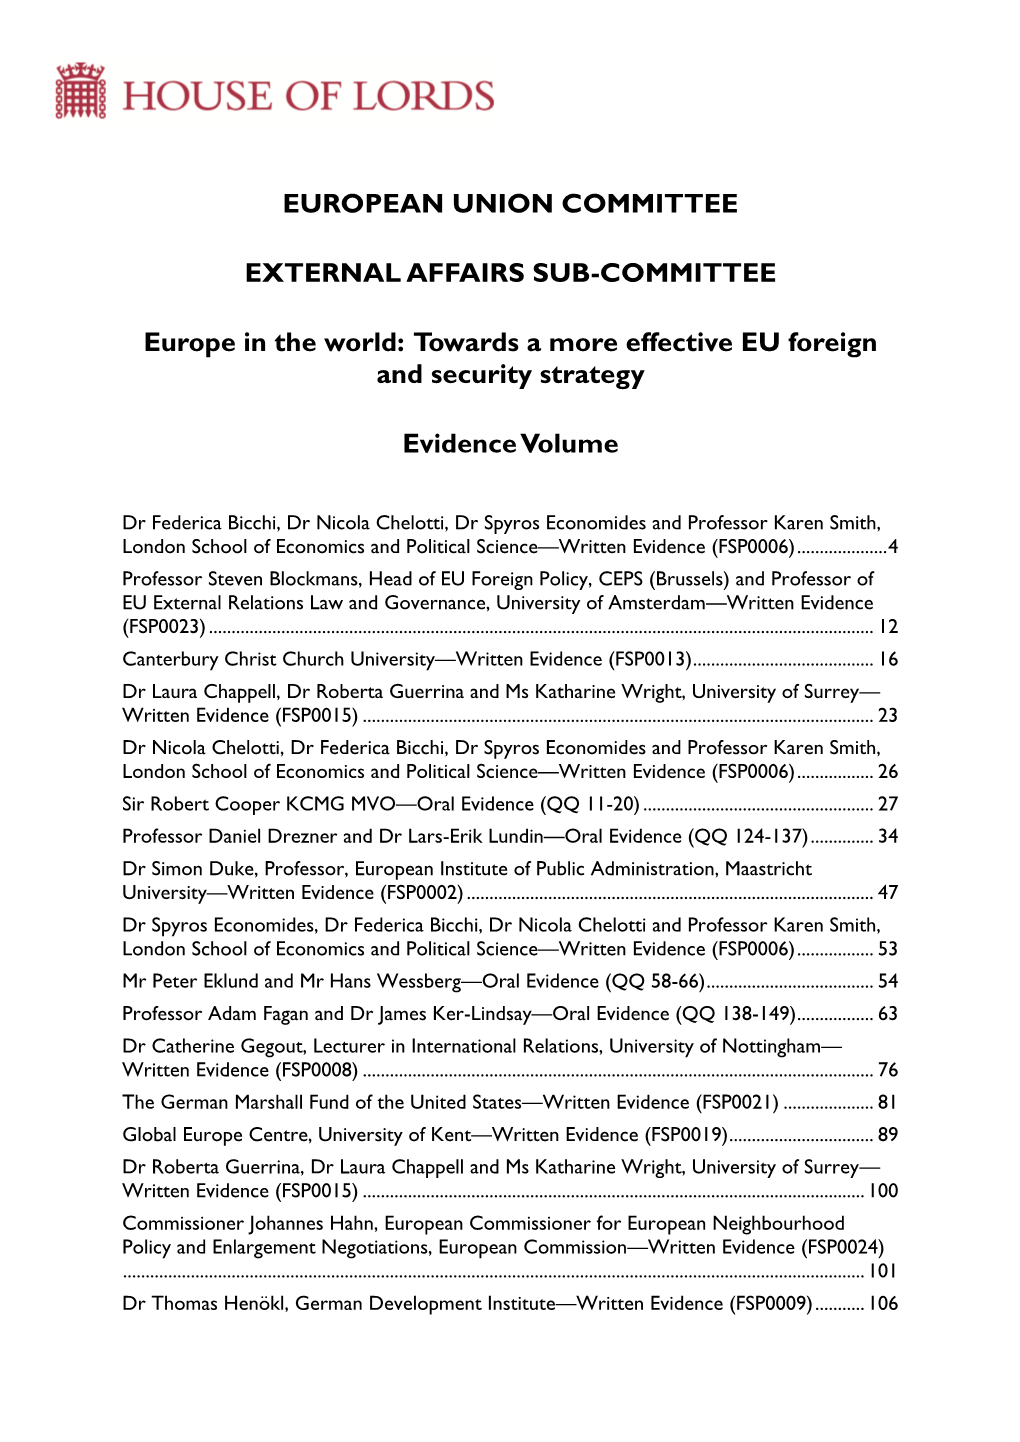 Towards a More Effective EU Foreign and Security Strategy